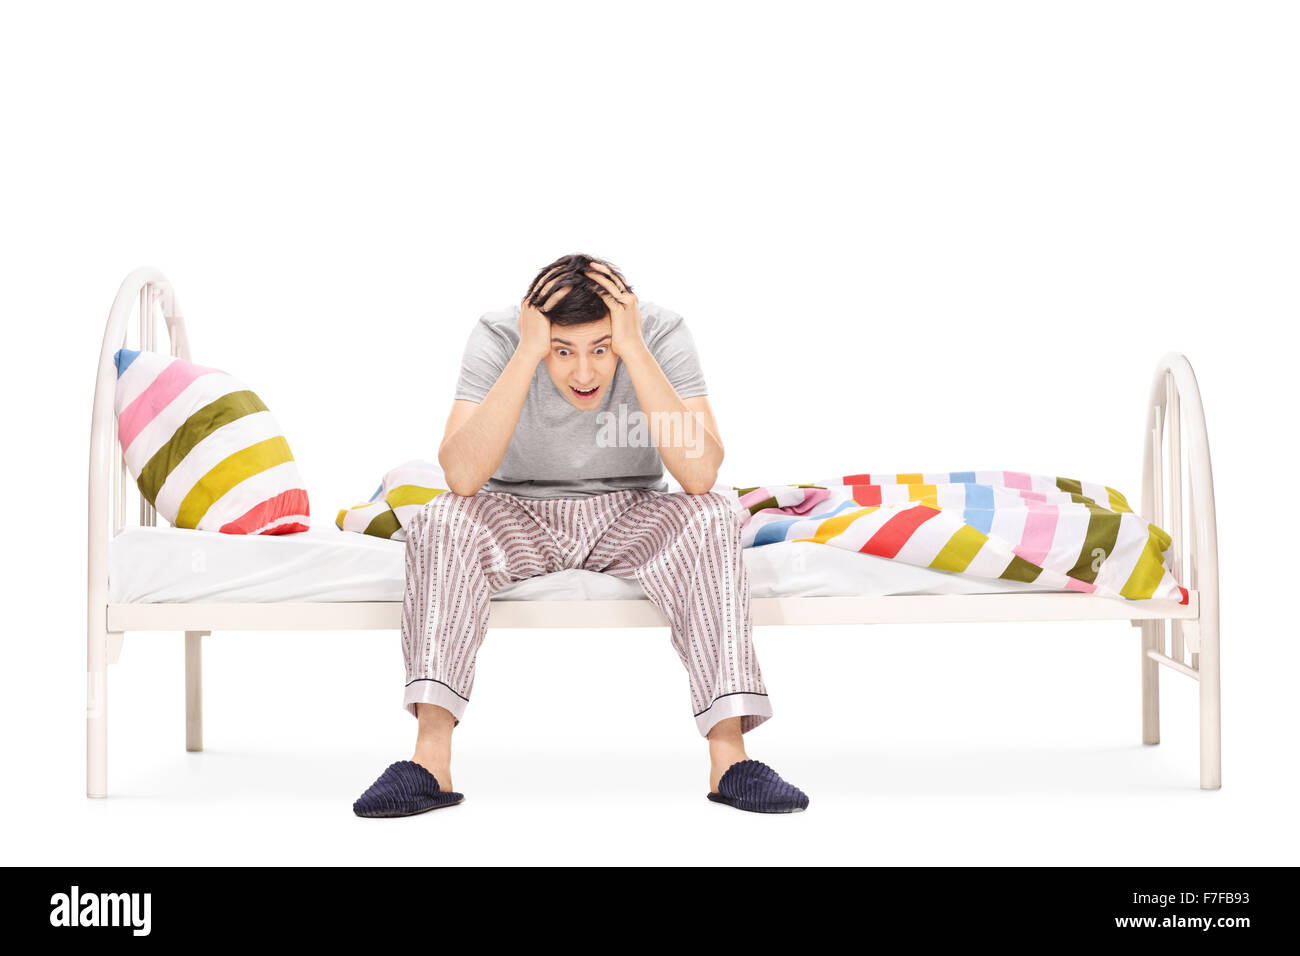 Young guy in pajamas sitting on a bed and suffering from insomnia isolated on white background Stock Photo